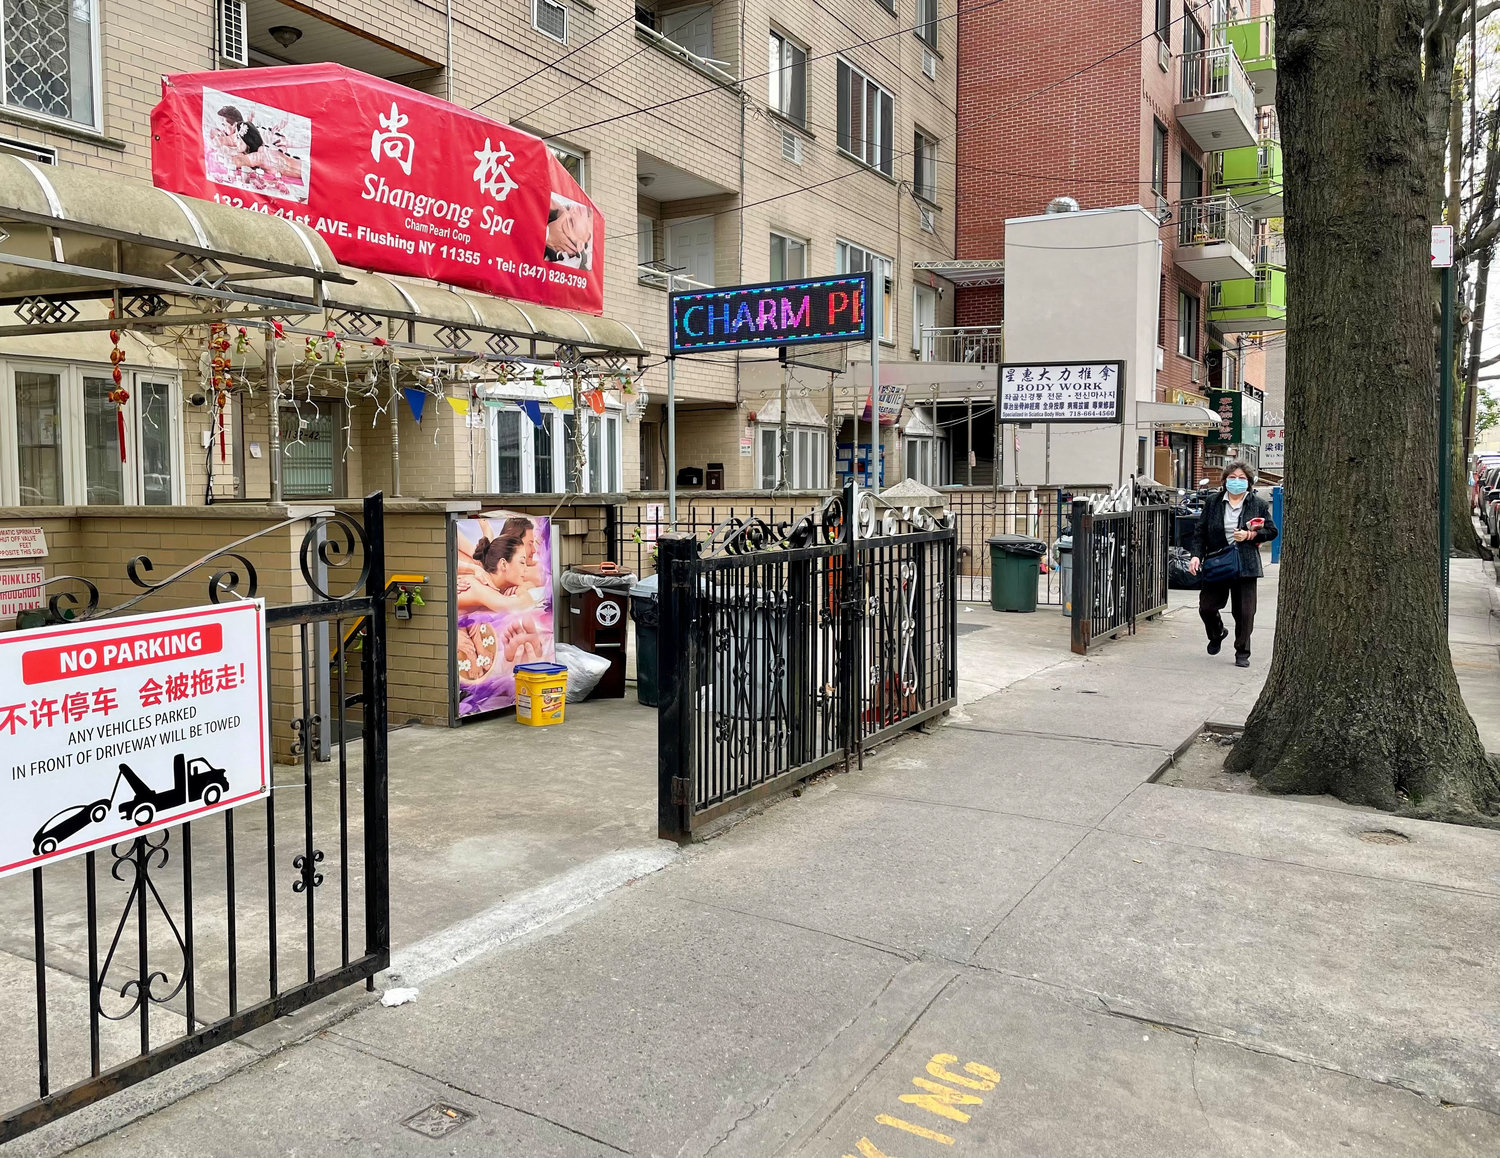 Workers at spas and massage parlors off of Flushing’s main thoroughfares, many of them legitimate, have been unjustly targeted by the NYPD under the guise of trying to stop human trafficking, advocates say. While some of the workers do engage in some sex labor, often it is because they have become indebted to the criminal-justice system, their backers say.